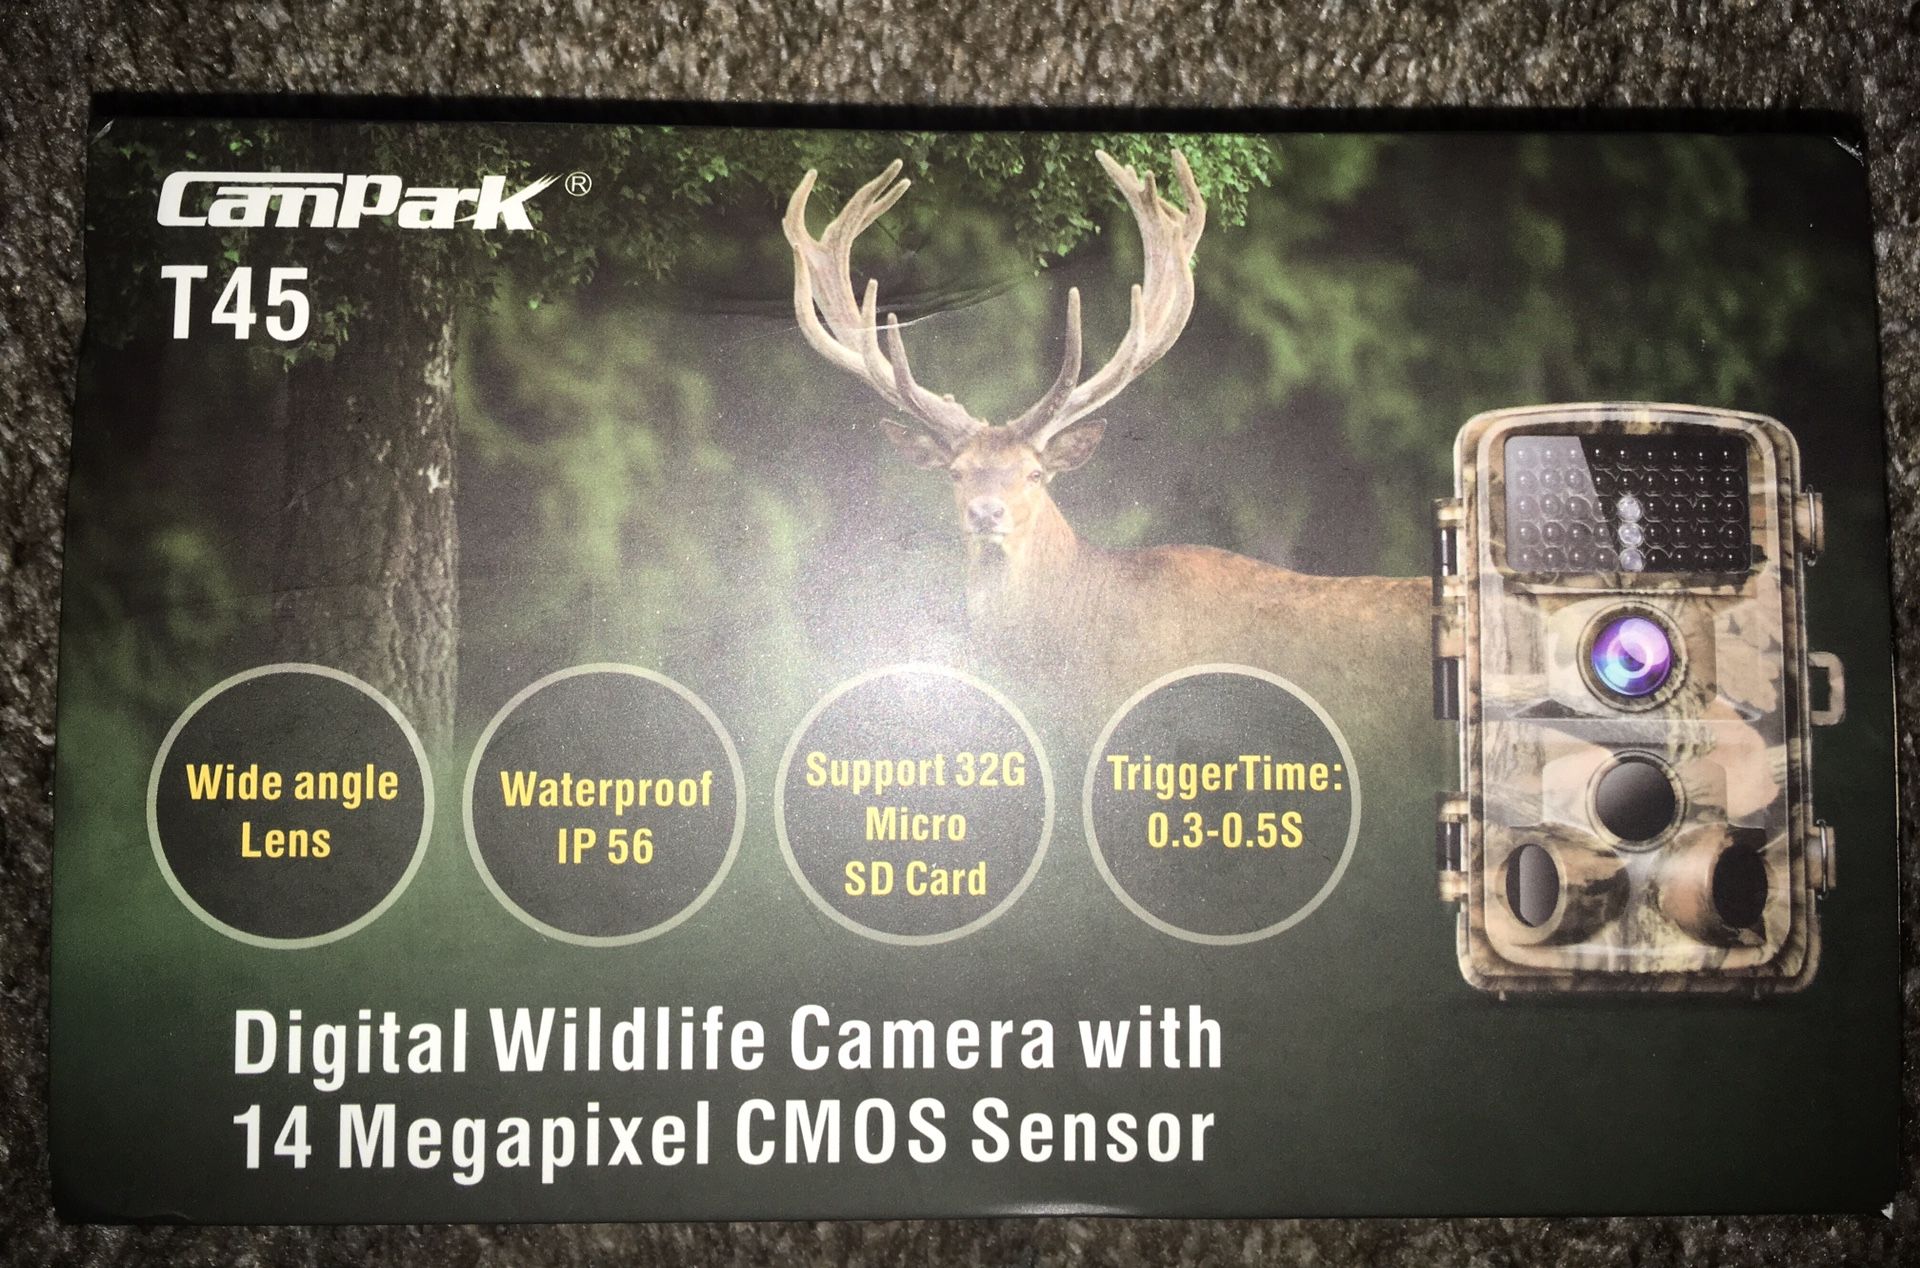 Brand new never used CAMPARK T45 TRAIL CAMERA